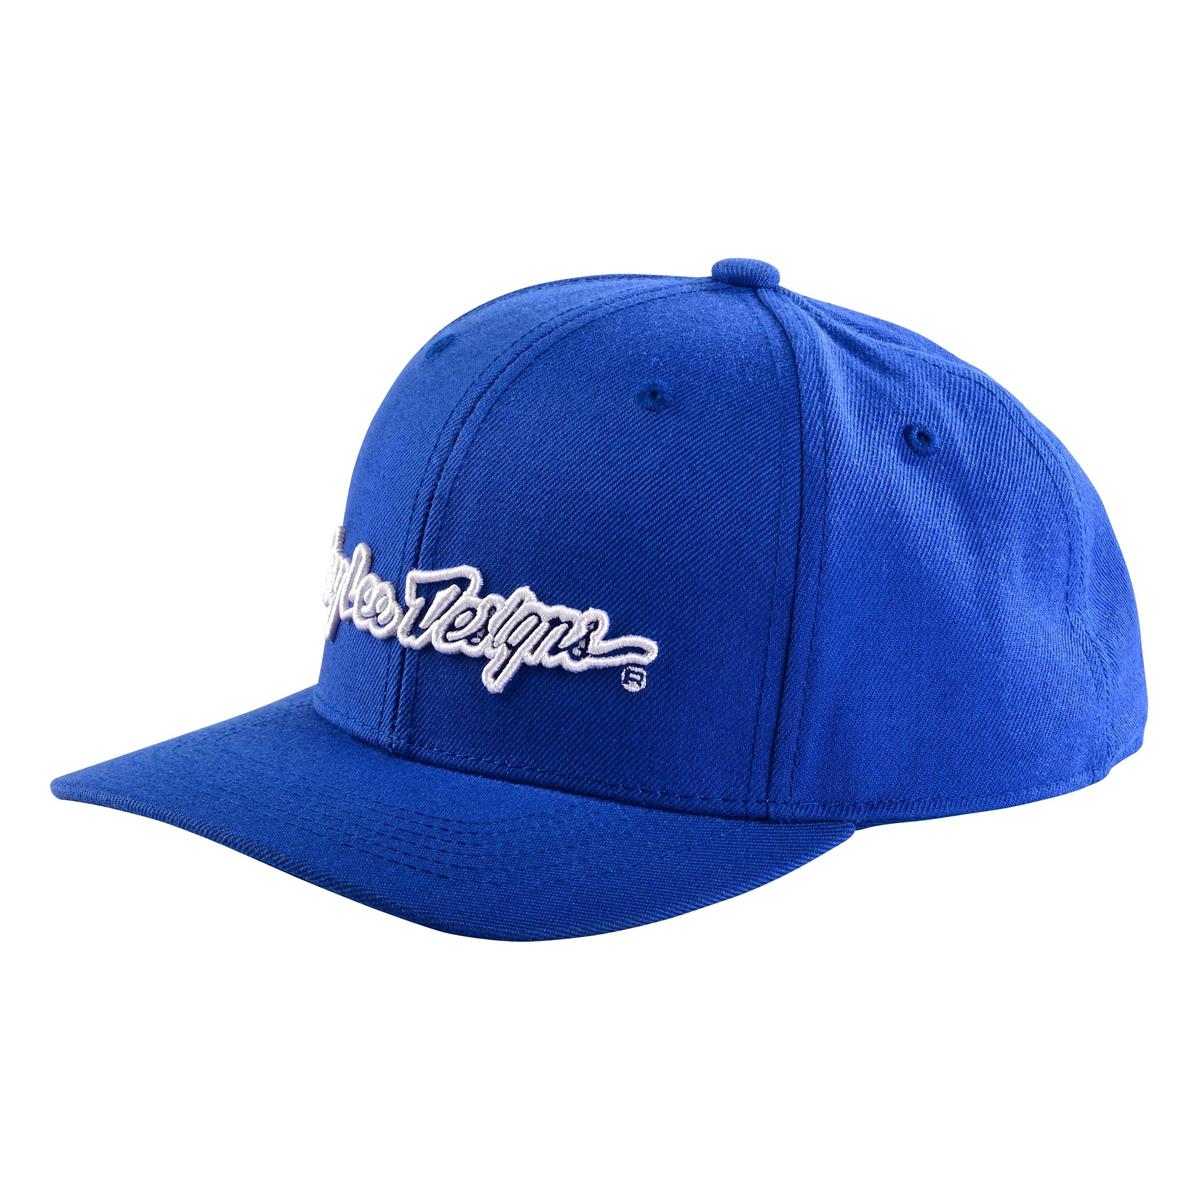 Troy Lee Designs 9Fifty Cappellino Snap Back Signature Blu/Bianco